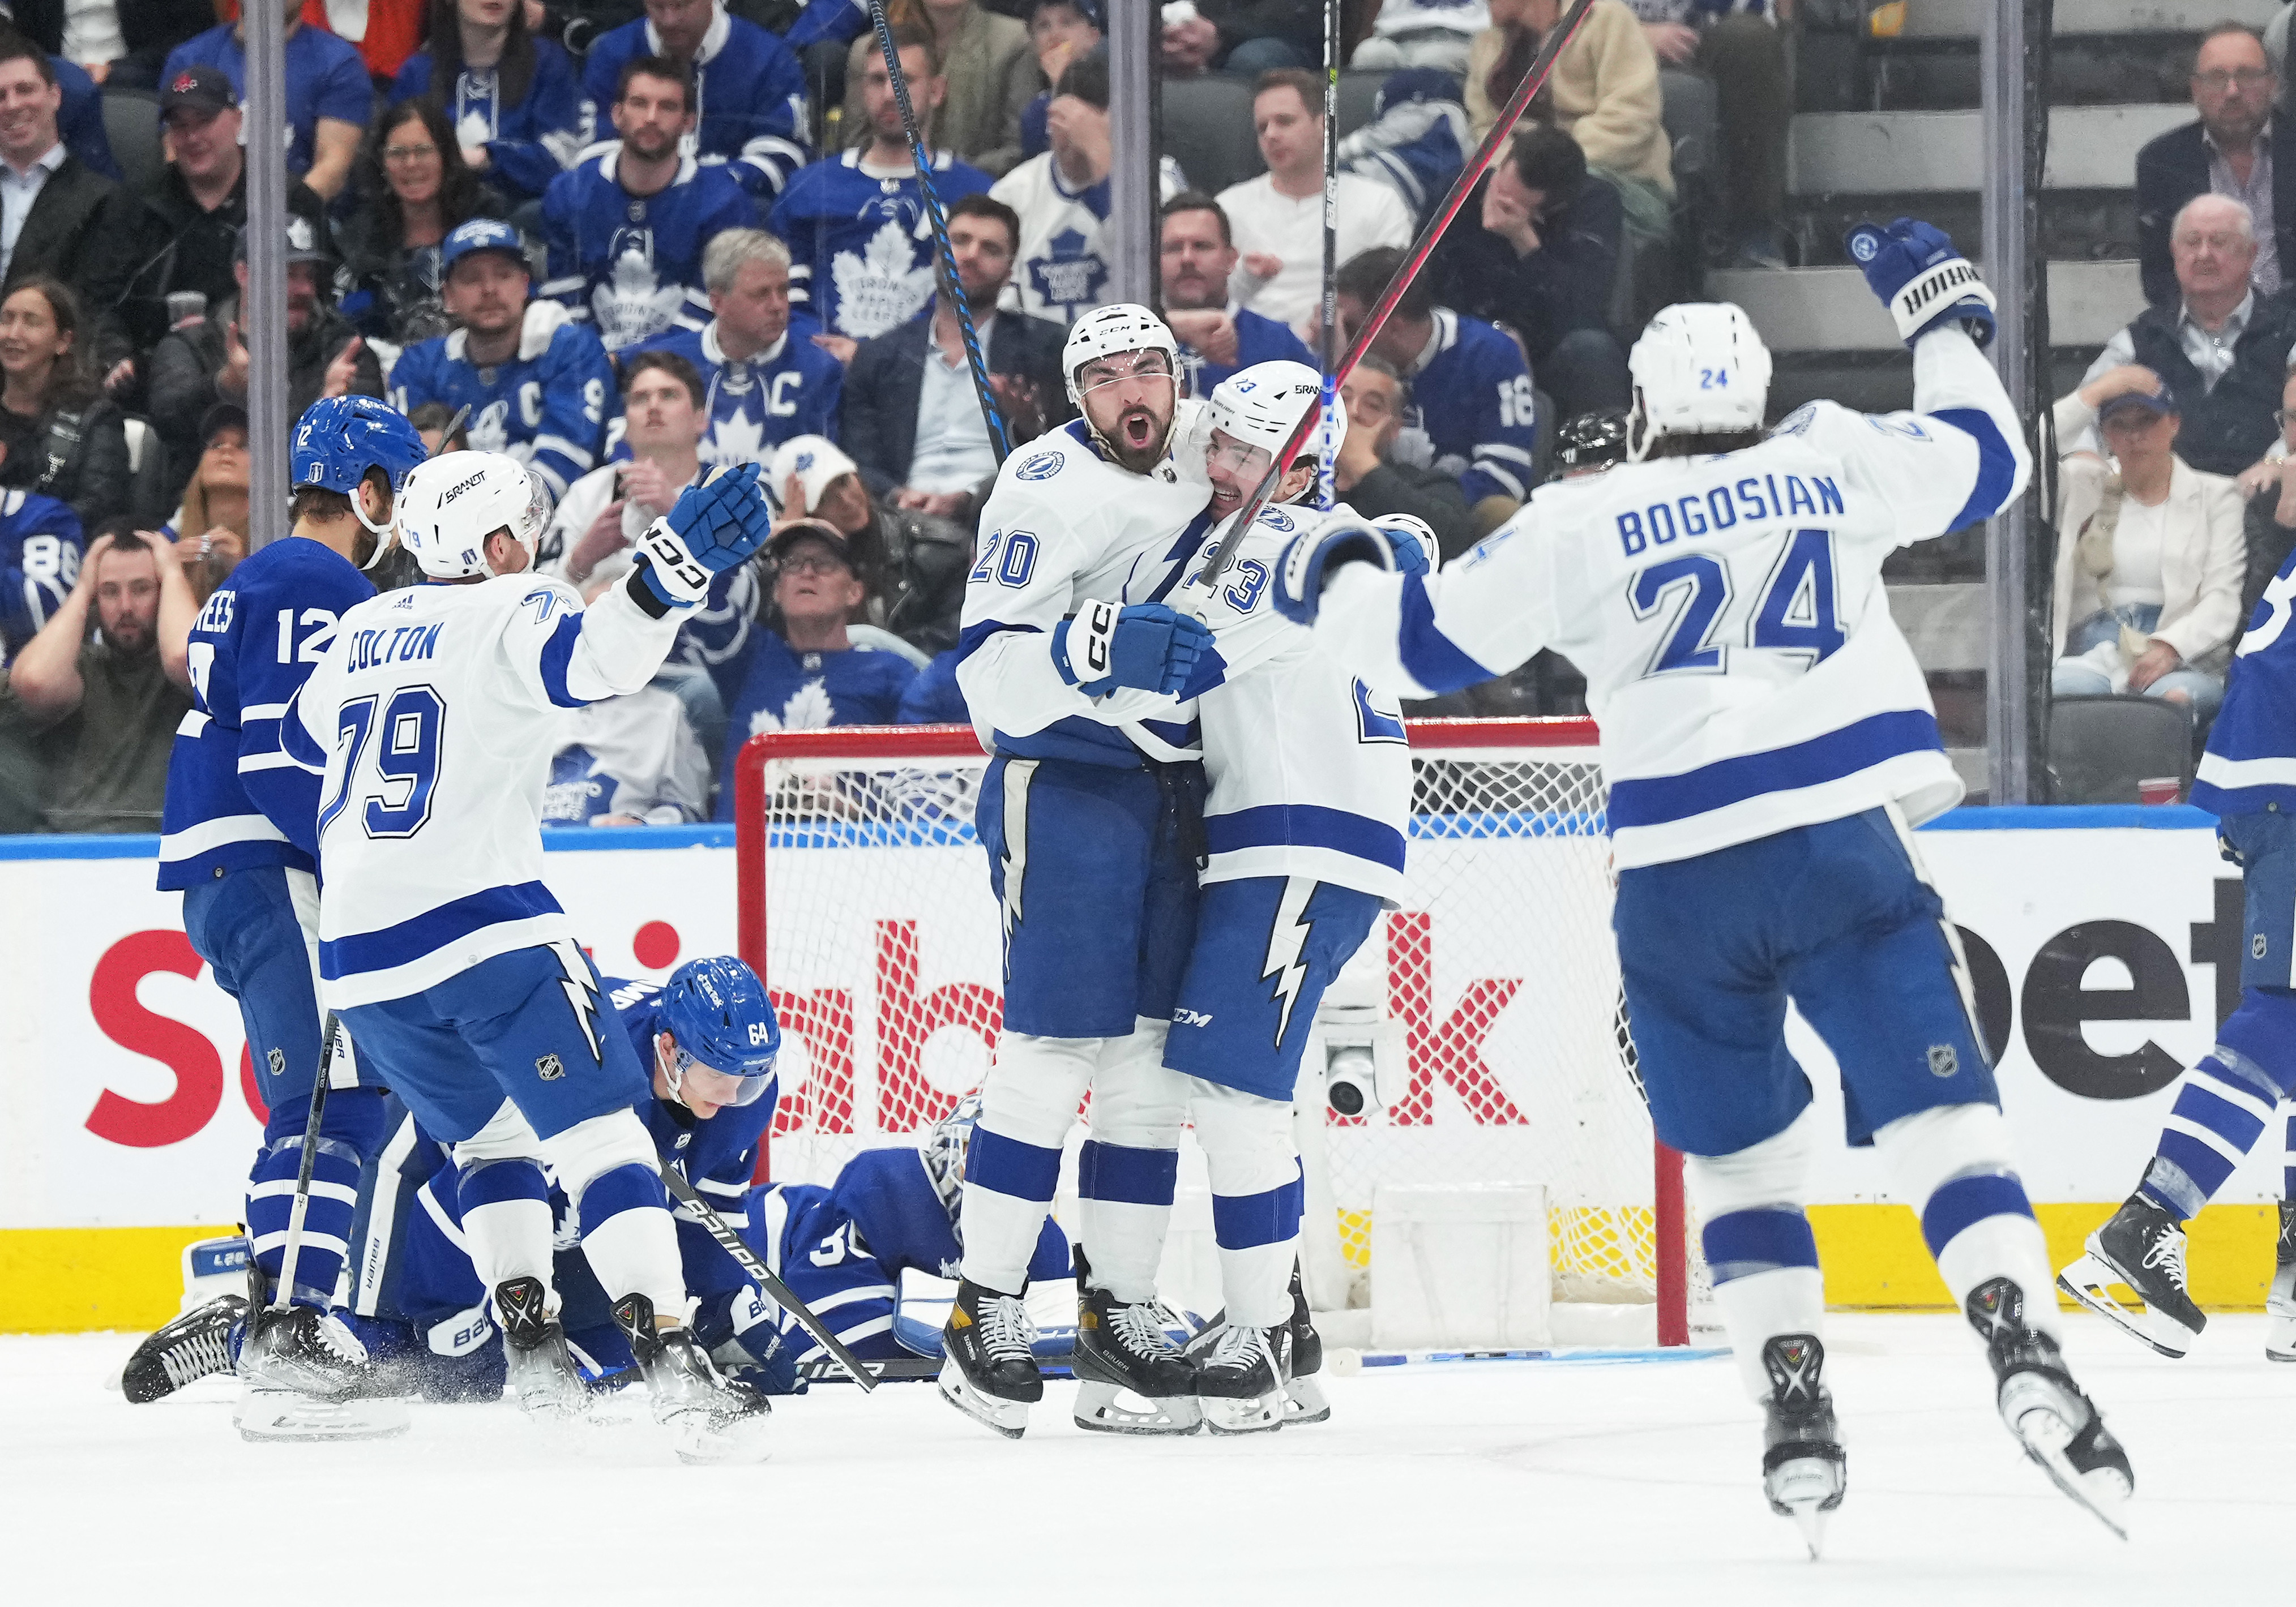 Toronto Maple Leafs Vs Tampa Bay Lightning: Who Wins this Playoff